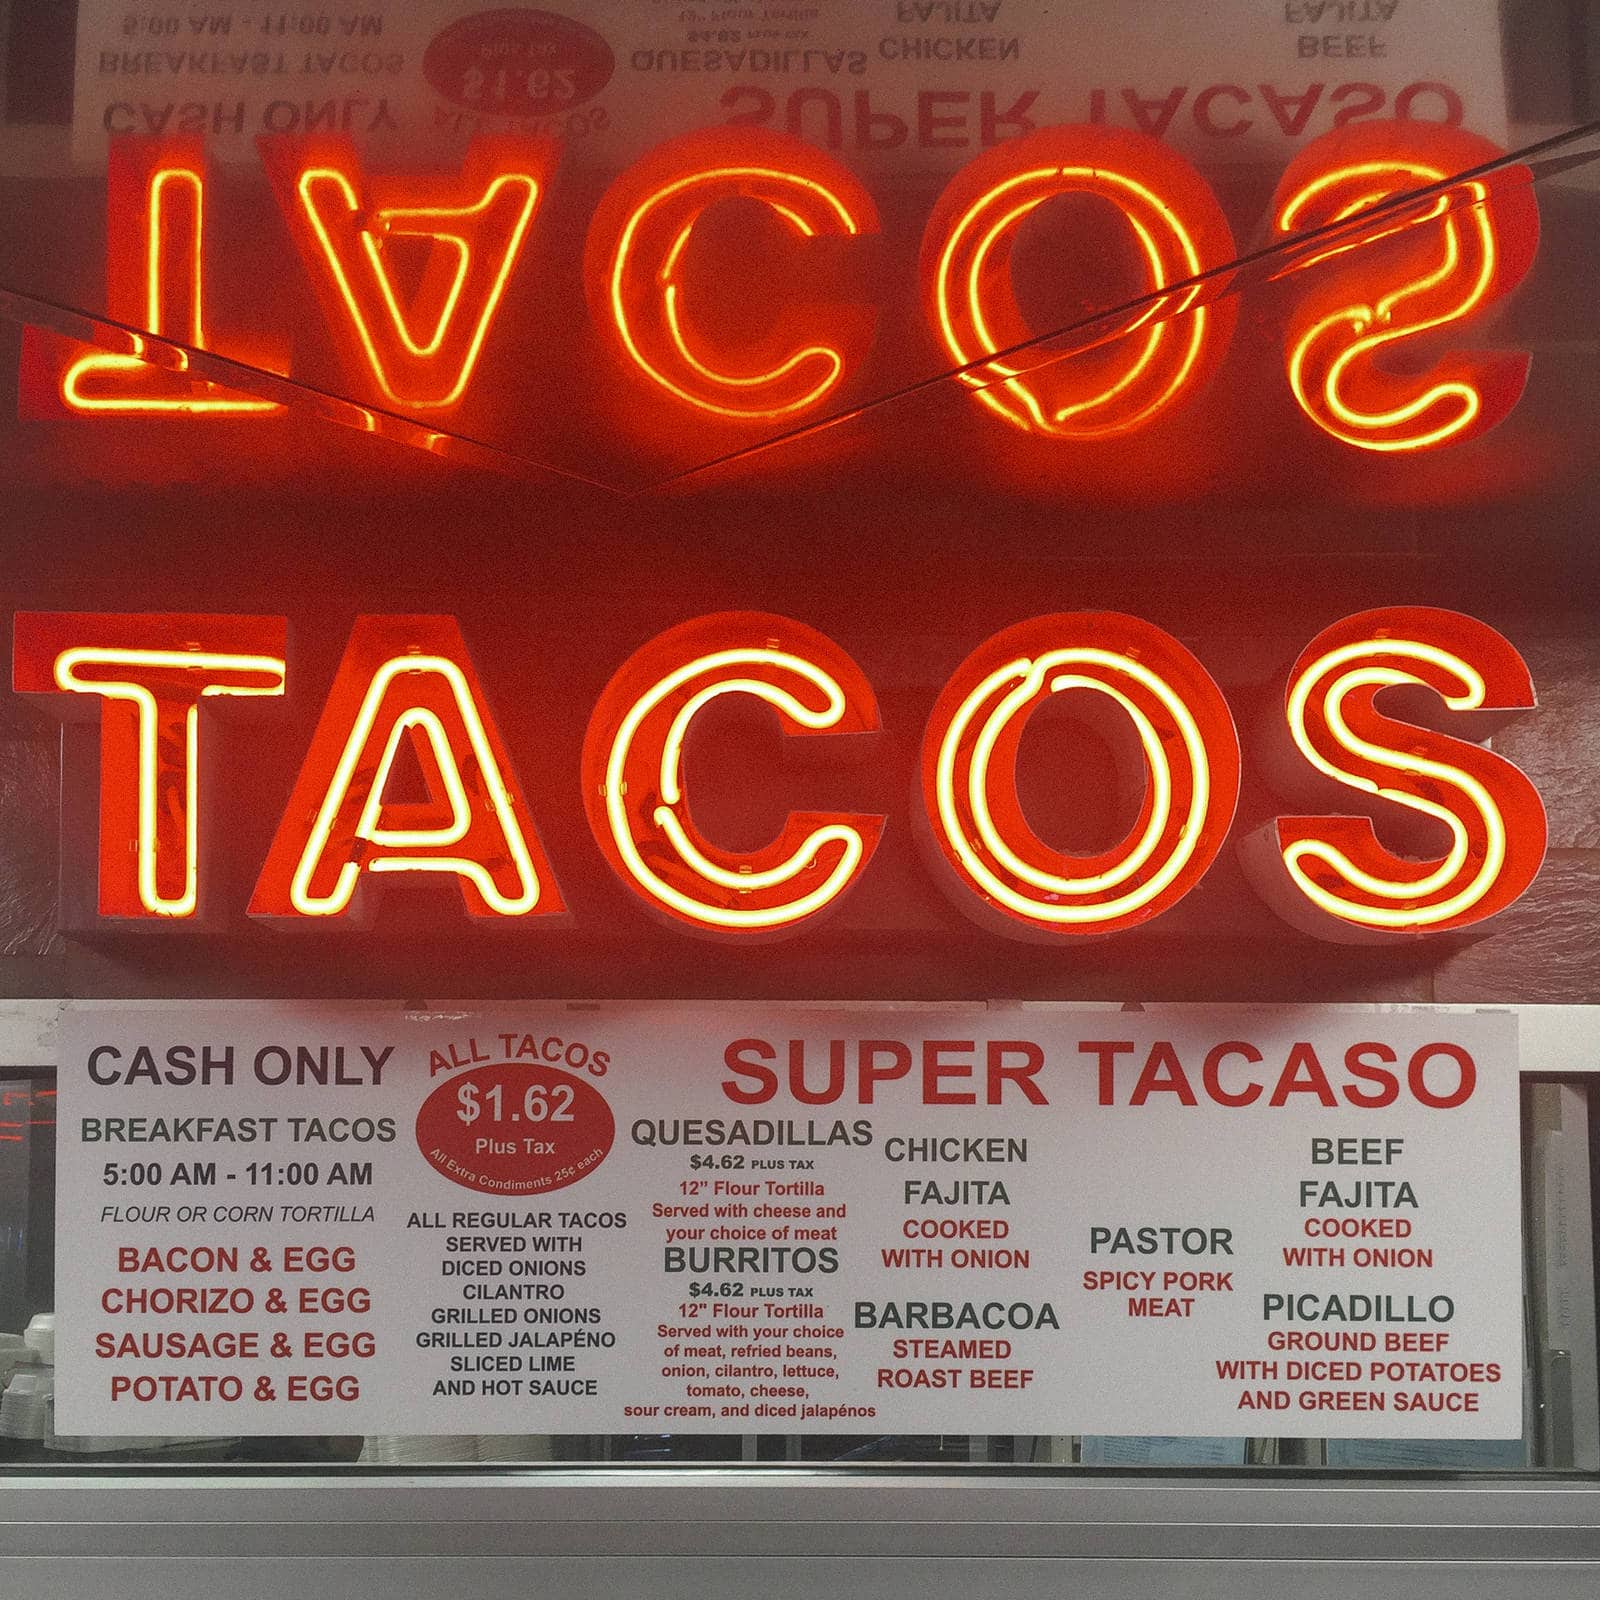 Photos People Remember: Neon Taco sign reflection